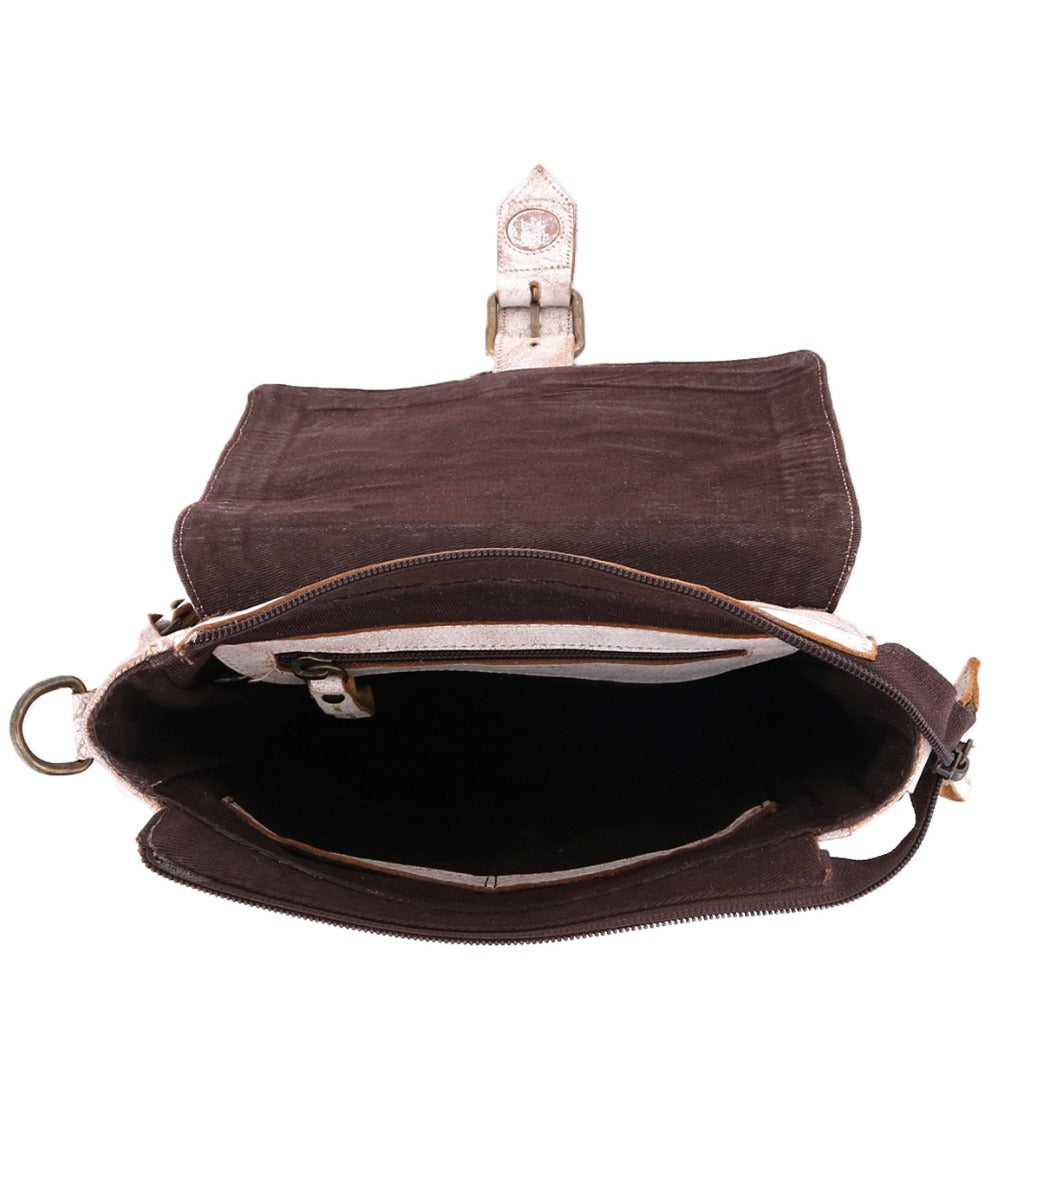 Open Bed Stu Ainhoa LTC brown leather crossbody handbag with a visible zipper and empty interior, isolated on a white background.